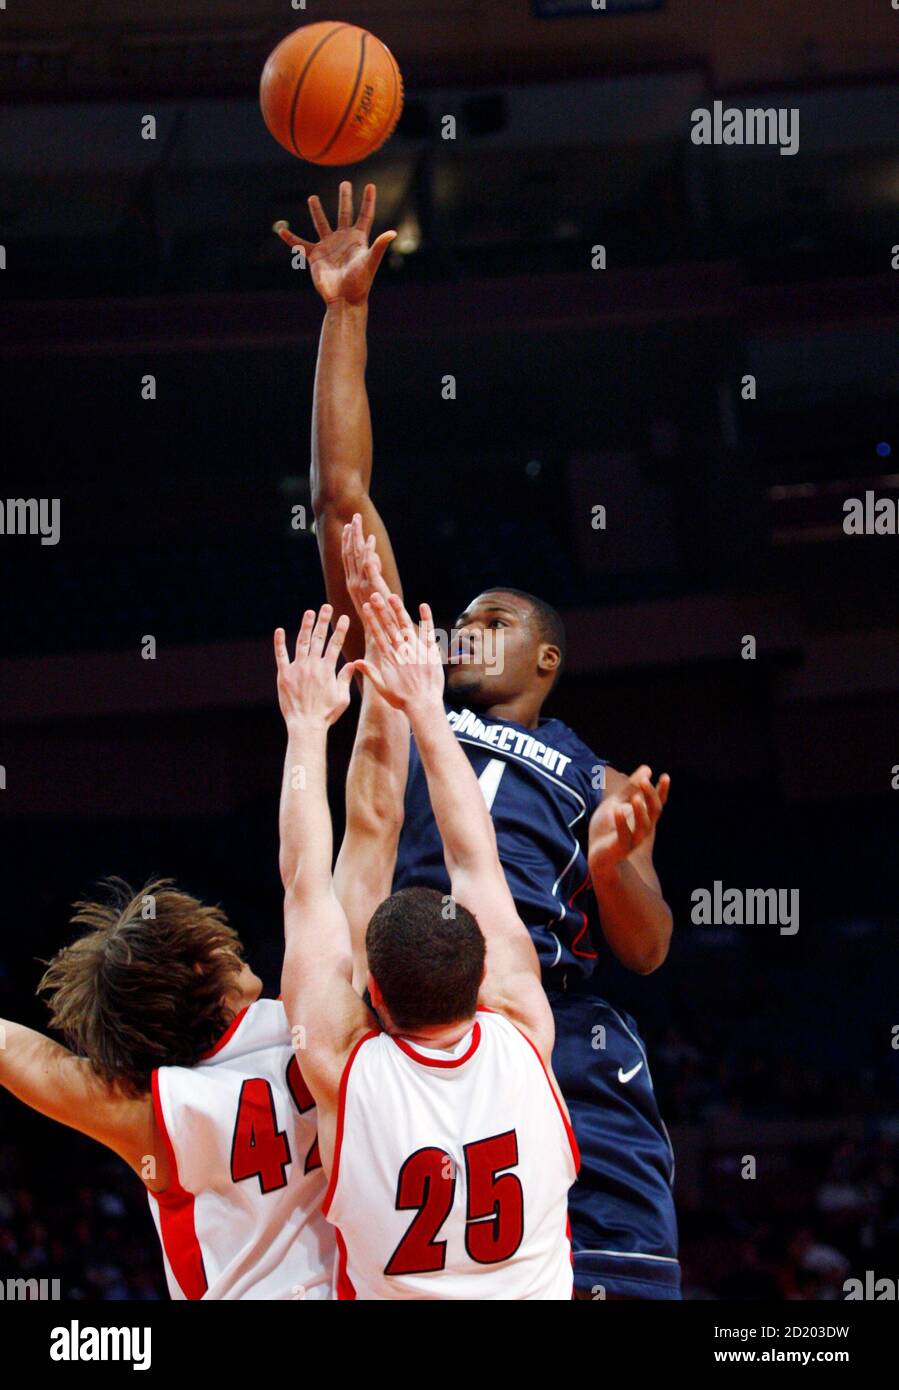 University of Connecticut's Jeff Adrien shoots over the defense of Gardner-Webb University's Auryn MacMillan (L) and Nate Blank (R) during the second half of their semi-finals game at the Coaches vs Cancer Classic NCAA college basketball tounament in New York, November 15, 2007. REUTERS/Mike Segar (UNITED STATES) Stock Photo